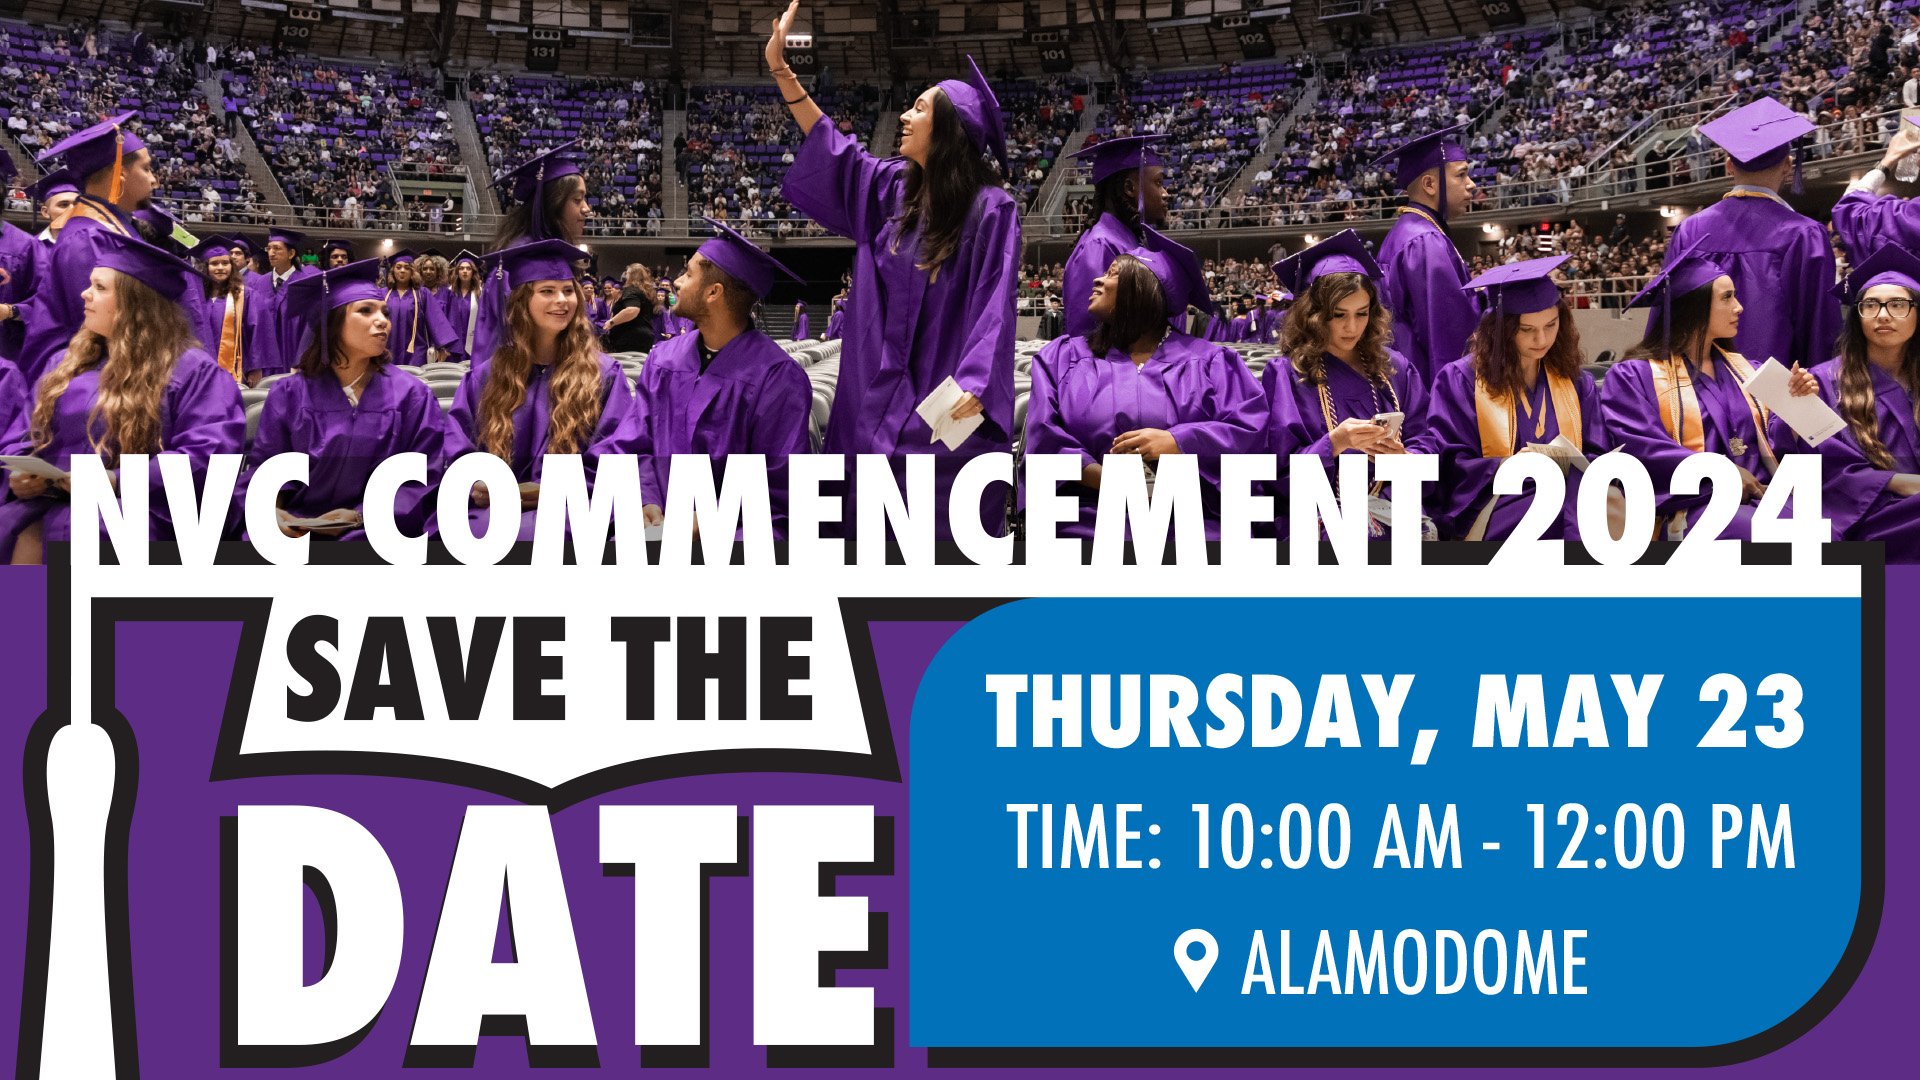 Commencement 2024 Date Announced: May 23, 2024 at 10am in the Alamodome!